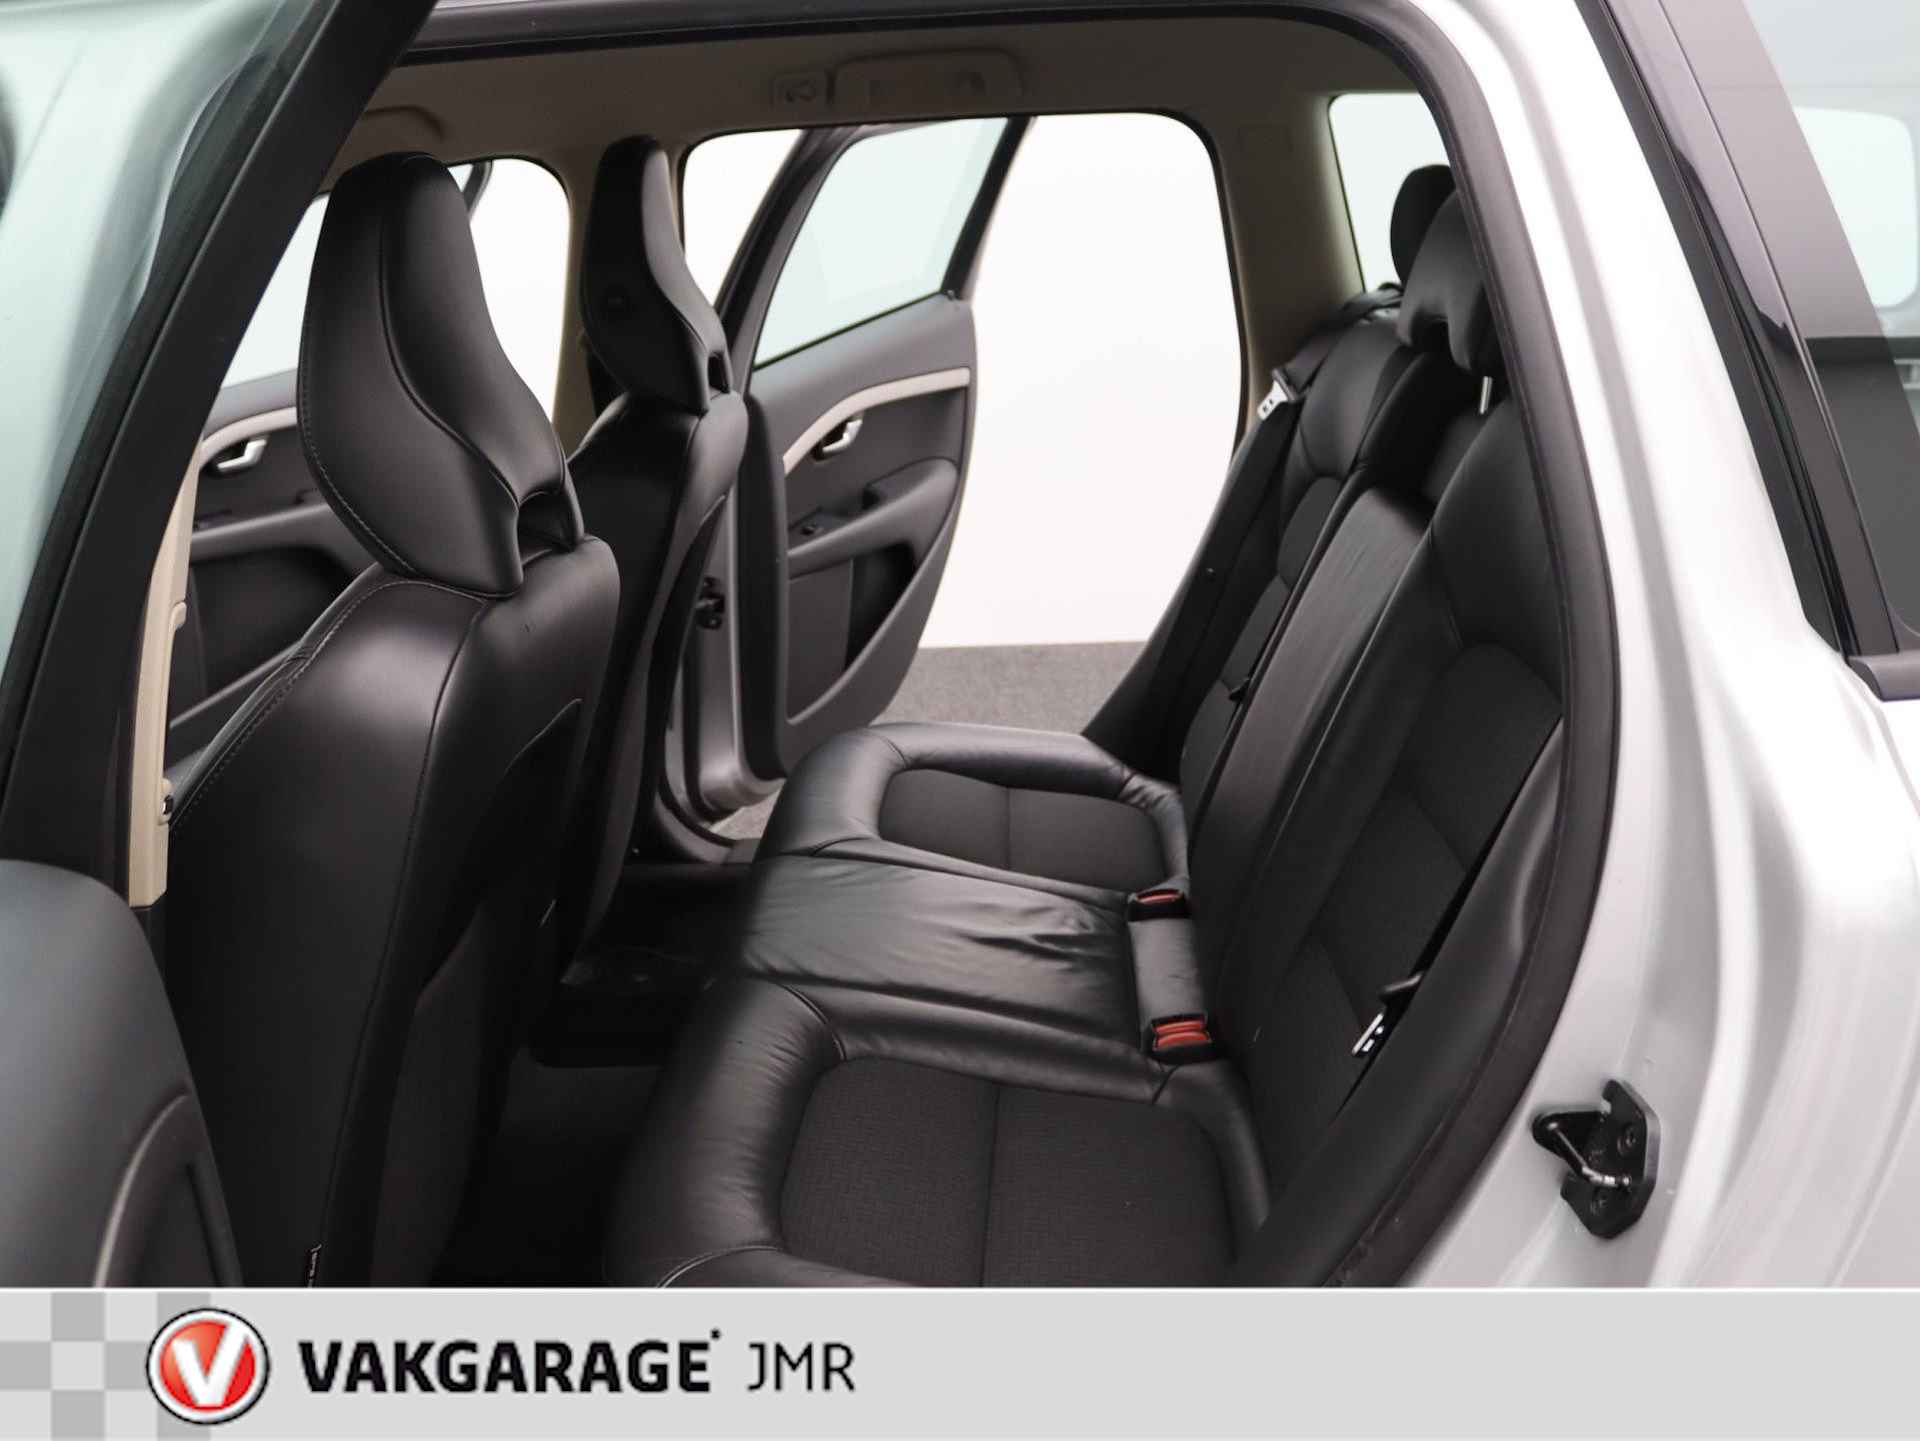 Volvo V70 2.5FT Momentum Youngtimer Trekhaak - PDC Achter - Stoel + Achterbank verwarming - Bluetooth - Climate en Cruise Control - 8/39